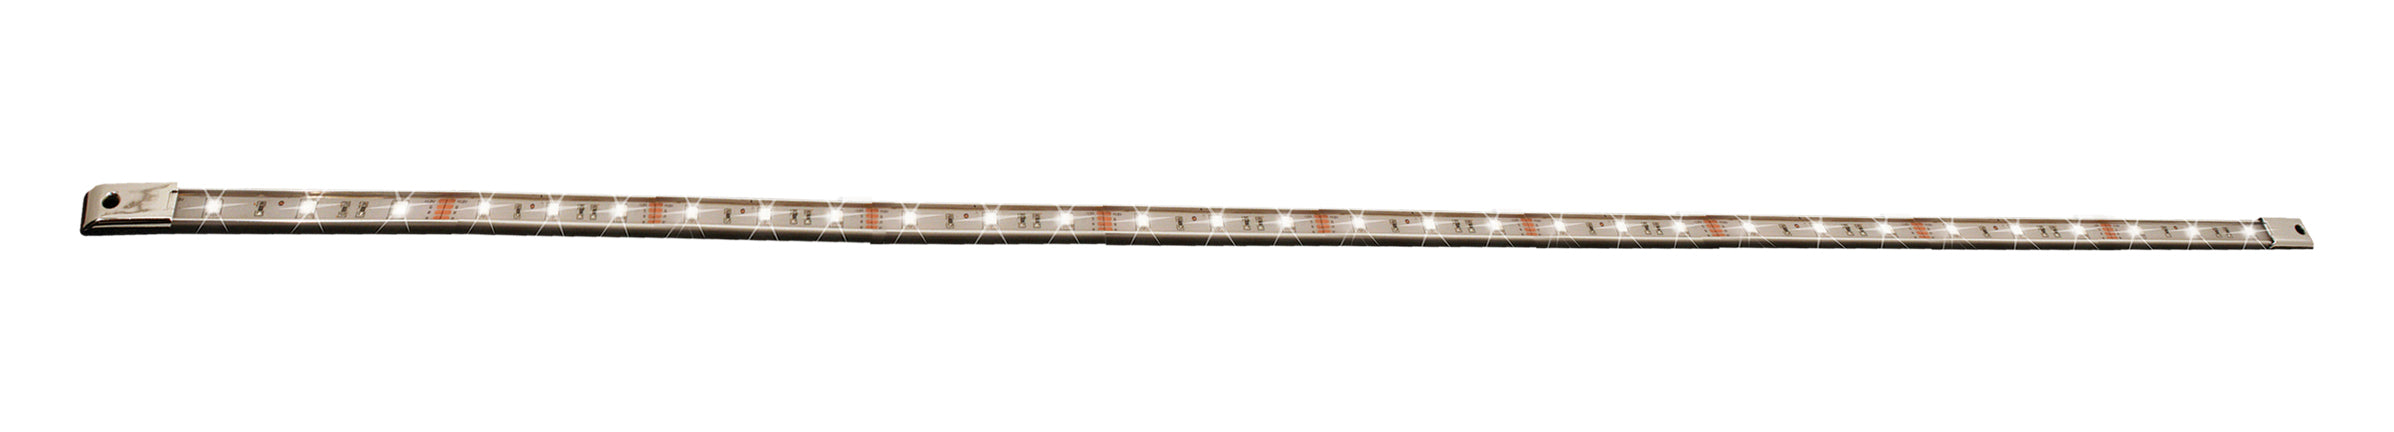 48 inch White LED Ultra Bright Accent Weatherproof Light Bar Strip with Aluminum Mounting Channel Ultra Series - USA Made Race Sport Lighting